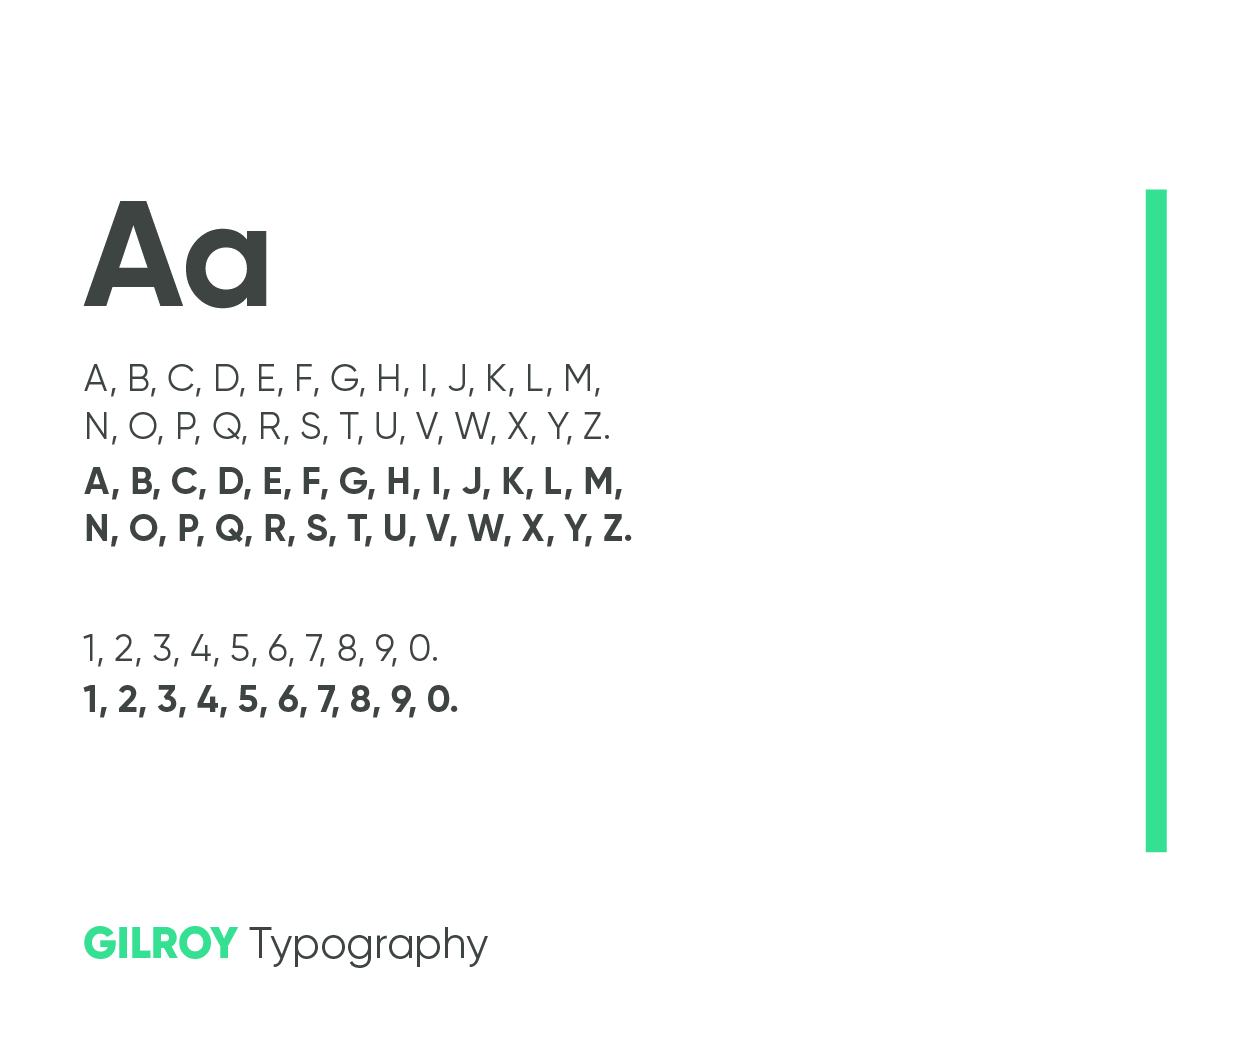 Miga - Marketing & communication firm for the digital today Typography Image